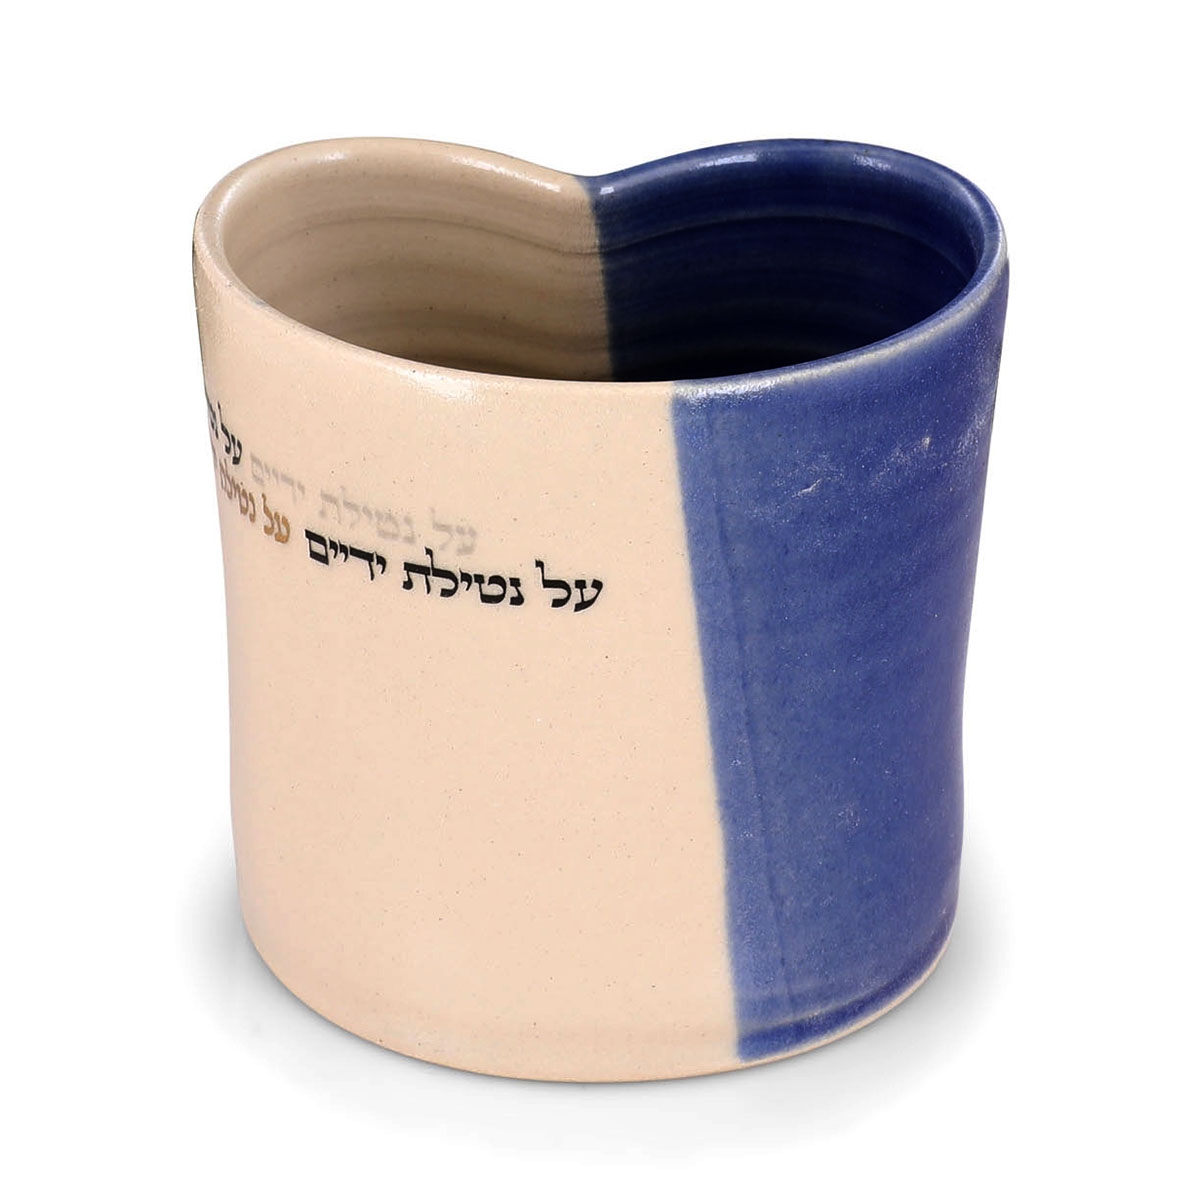 Handmade Shaped Ceramic Washing Cup - Blessing. Available in Different Colors - 1